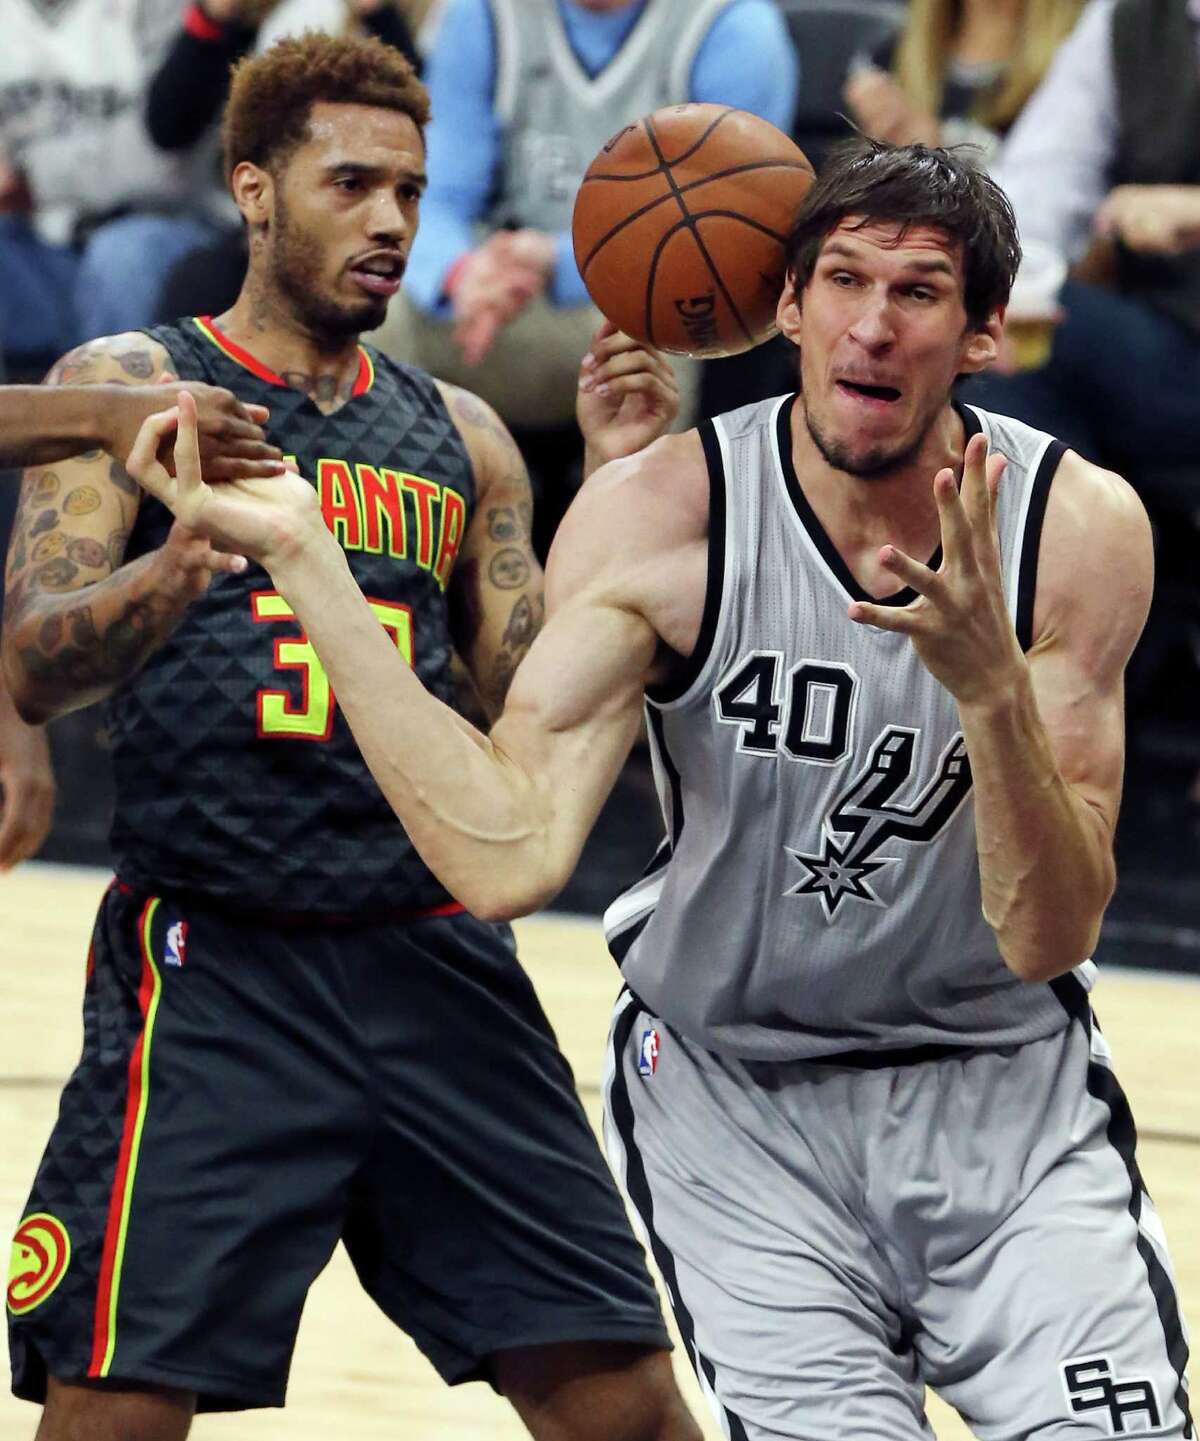 Atlanta Hawks' Mike Scott and San Antonio Spurs' Boban Marjanovic grab for a loose ball during second half action Saturday Nov. 28, 2015 at the AT&T Center. The Spurs won 108-88.